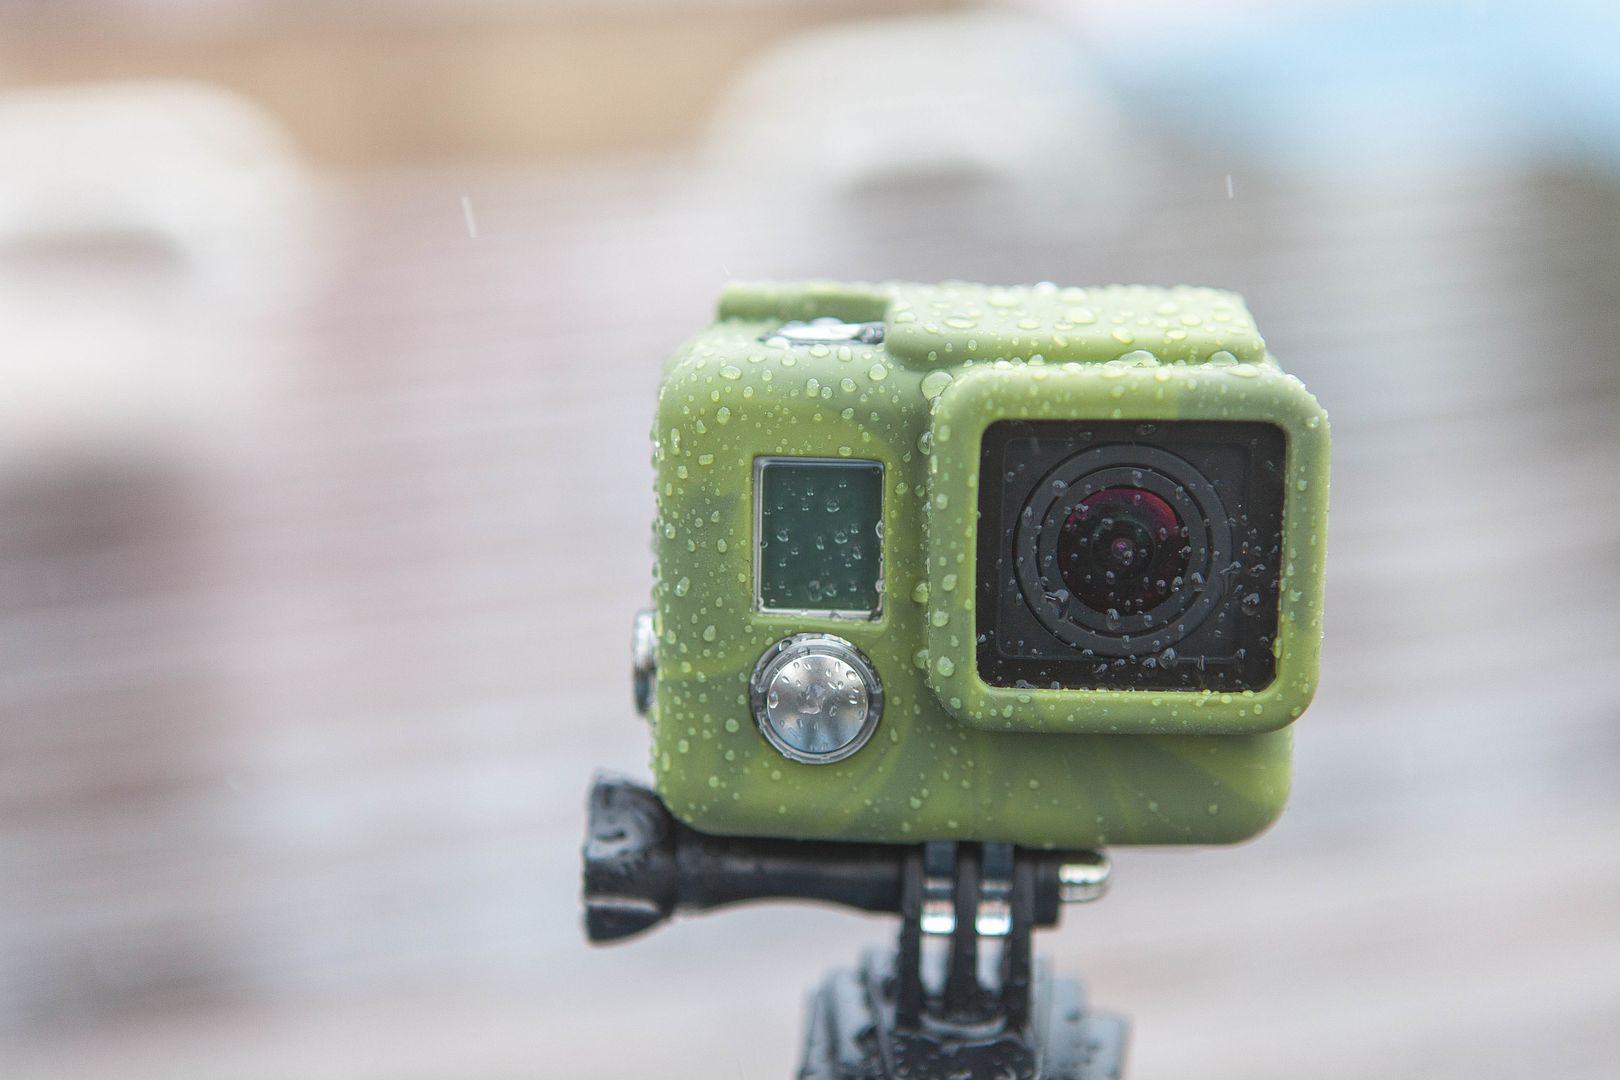 Silicone case for GoPro cameras from Photojojo